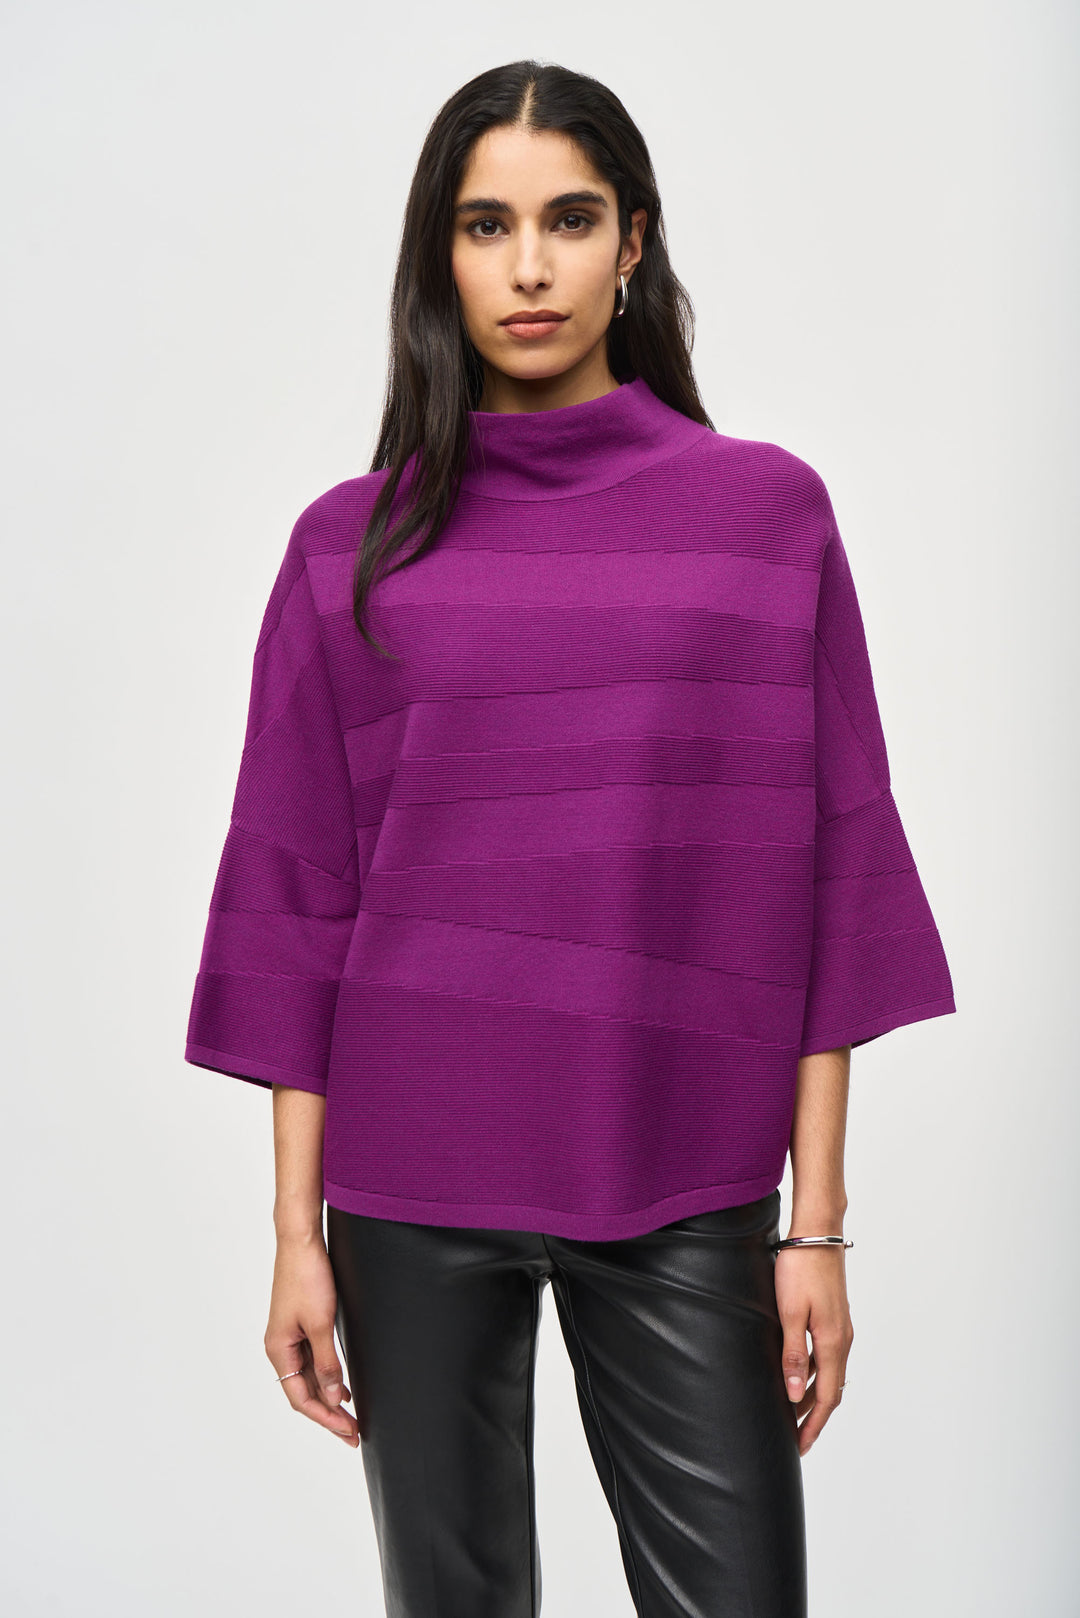 Joseph Ribkoff Fall 2024 This relaxed fit sweater top features a neat mock neck, 3/4 length sleeves, and stitch details, creating a boxy and effortlessly chic look.